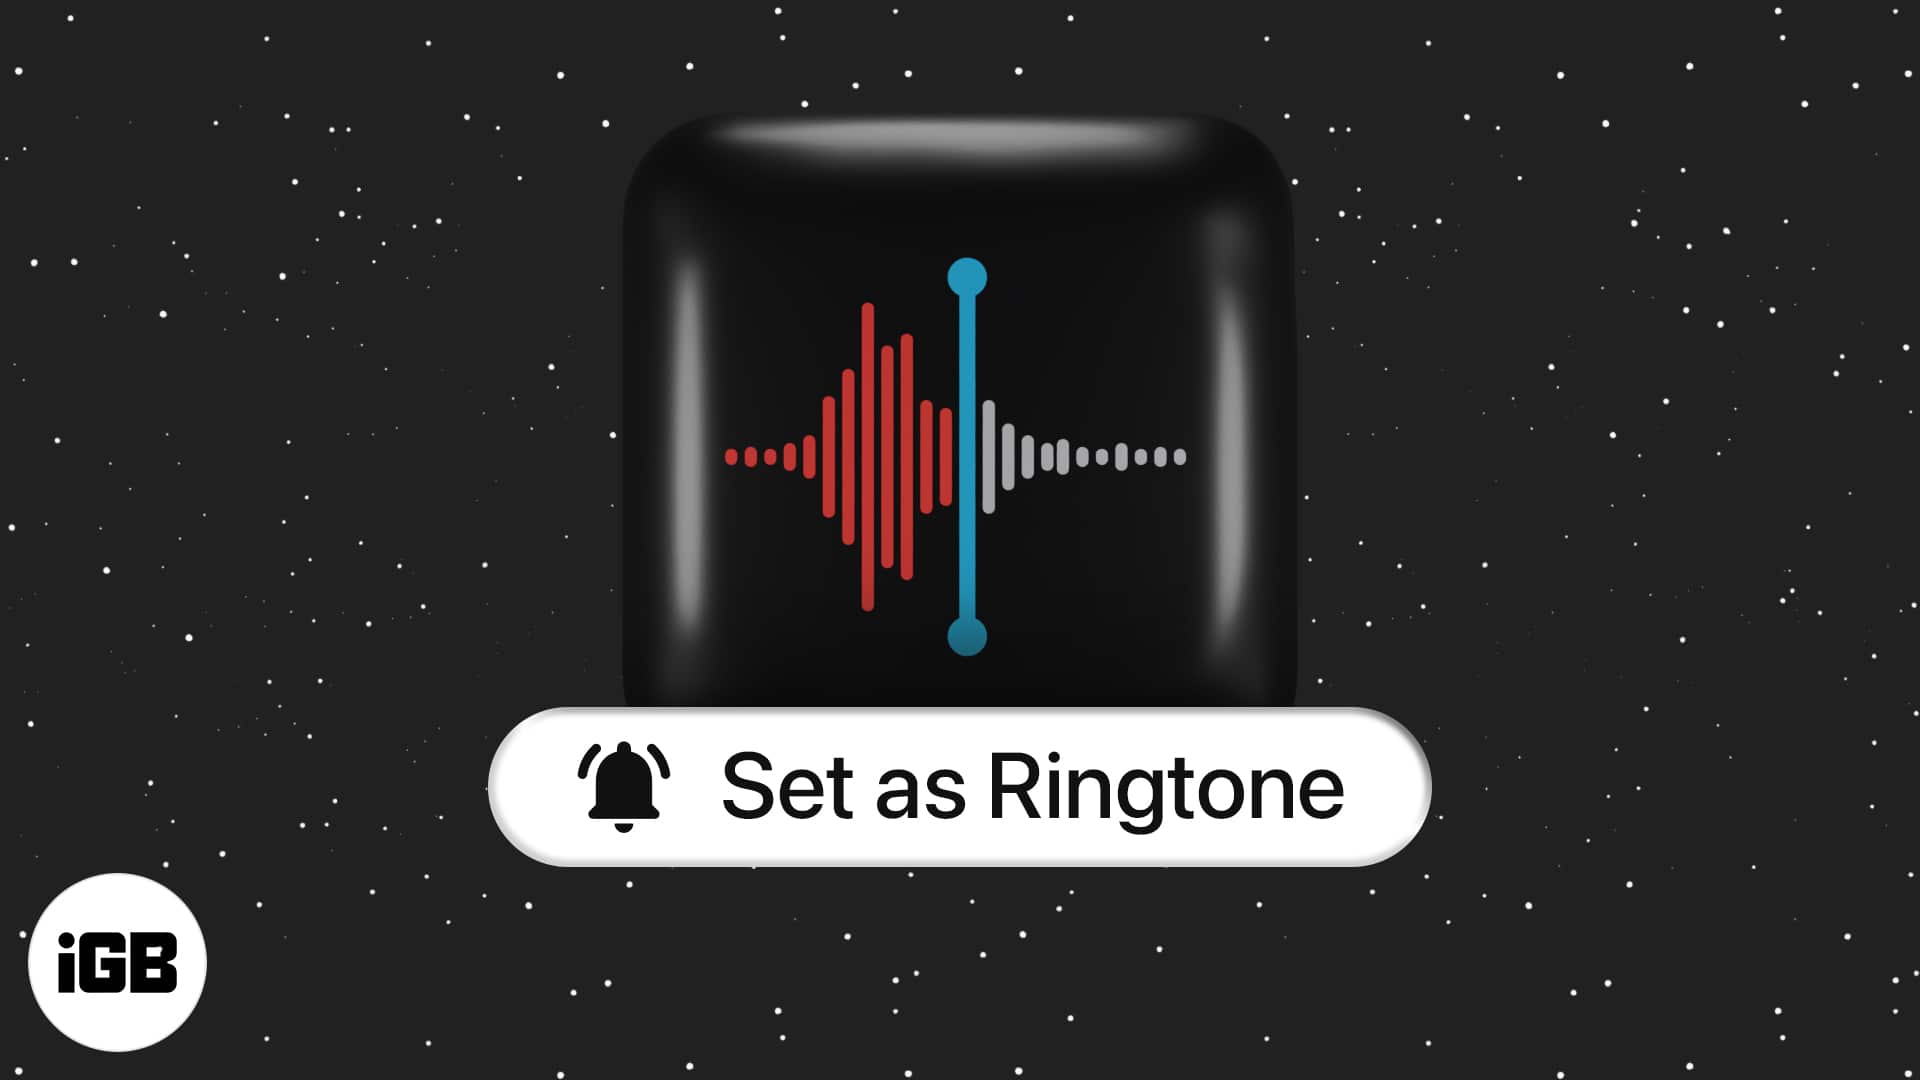 How to make a voice memo a ringtone on iphone